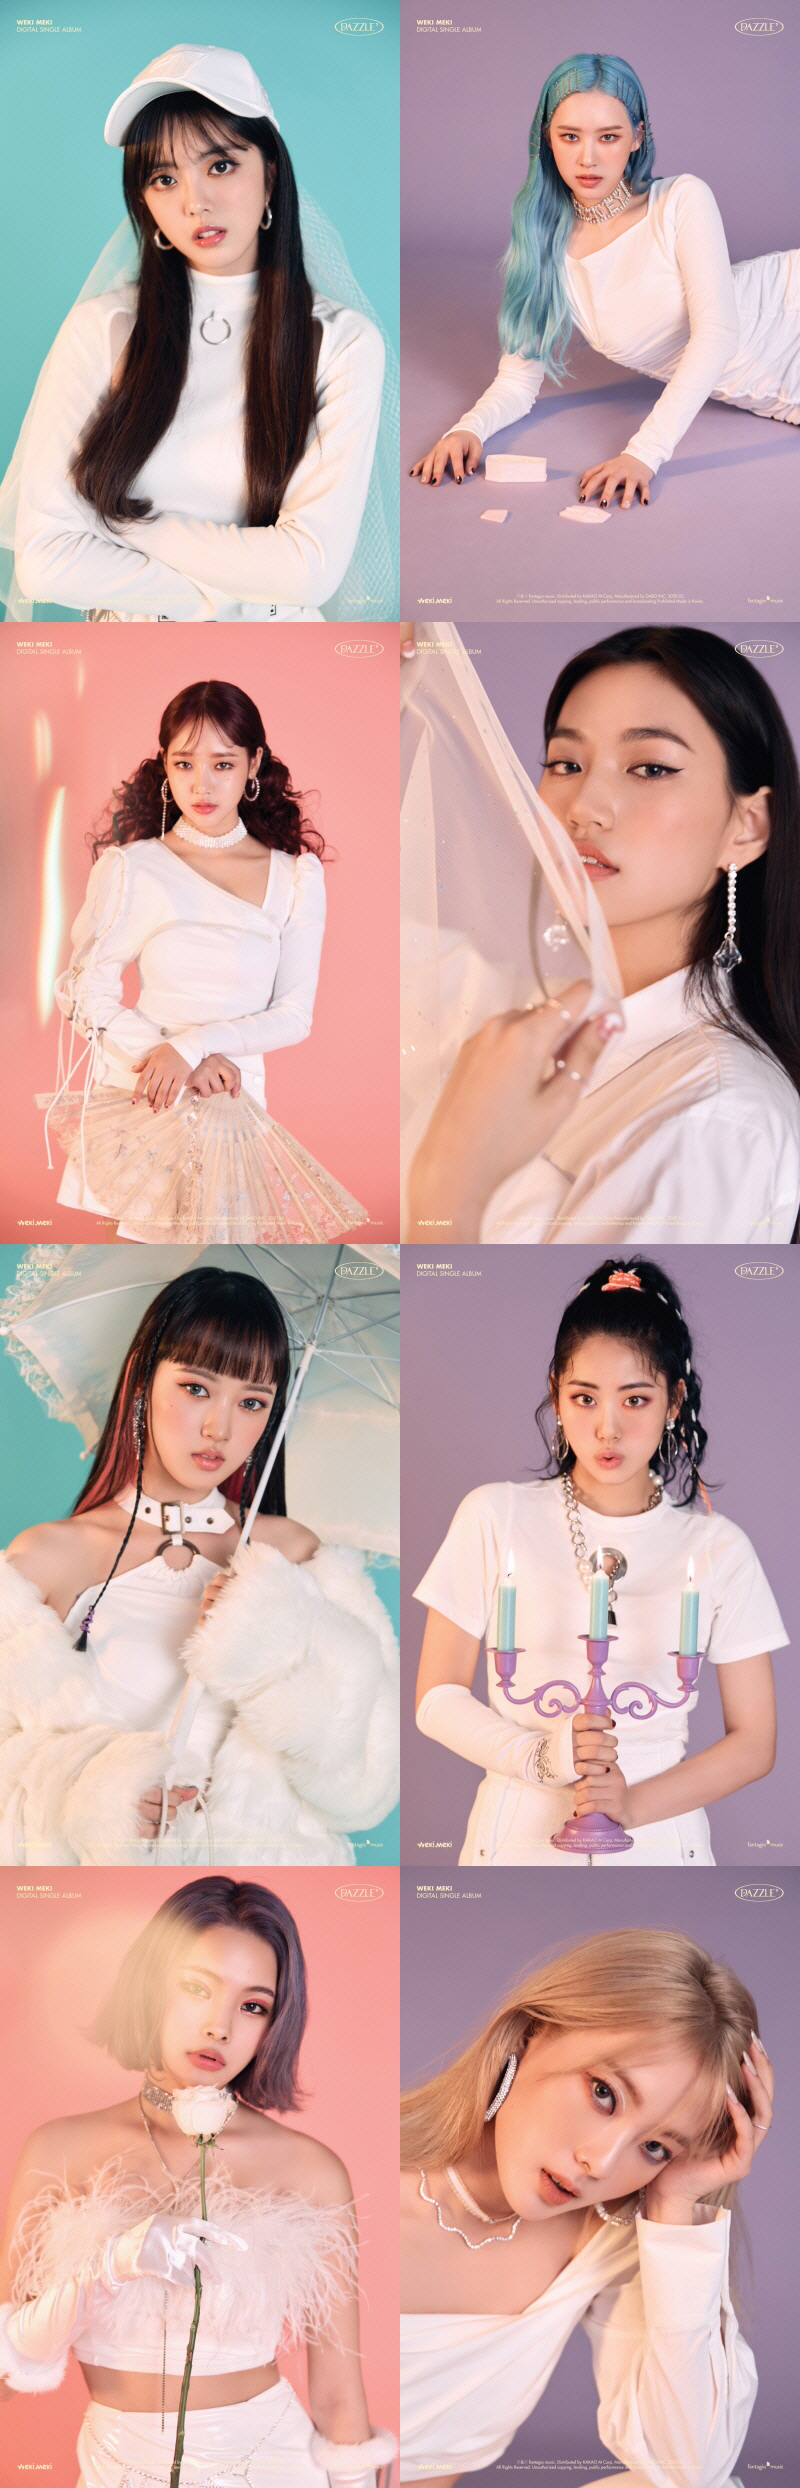 Group Weki Meki (Weki Meki) first released the Teaser Image of the new song DAZZL DAZZLE (Dazle Dazzle).On the 13th, Weki Meki (Ji Su-yeon, Eli, Choi Yoo-jung, Kim Do-yeon, Summer savory, Lua, Lina, Lucy) released the concept Teaser Image of the digital single DAZZLE DAZZLE (Daezzle Dazzle) through the official SNS channel.In the photo released with the phrase DAZZLING FUNERAL (Daezzling Funeral), Weki Meki focuses attention by utilizing their charm with pastel hair and intense eye makeup that are points in white costumes.The provocative gaze that gazes at the camera indifferently in the background of vintage colors creates a mysterious yet SinB atmosphere.While props such as ball caps with mesh, miniature tubes, and candles stimulate curiosity, colorful colors and sparkling accessories are in a subtle harmony and amplify the curiosity about the transform of Weki Meki.Weki Meki, who announced his comeback through a coming-up Teaser and plan poster, will be in front of the public with his digital single album DAZZLE DAZZLE on the 20th.The title song Dazzle Dazzle is expected to be accompanied by Anna Timgren (Anna Timgrens) and STAINBOYS (Stainboys), who participated in a number of K-POP girl group albums including BoA, Womens Friend and Twice, and created famous songs.On the other hand, Weki Meki, who foresaw a different transform with the concept of mysterious charm, is in the midst of preparing for comeback.